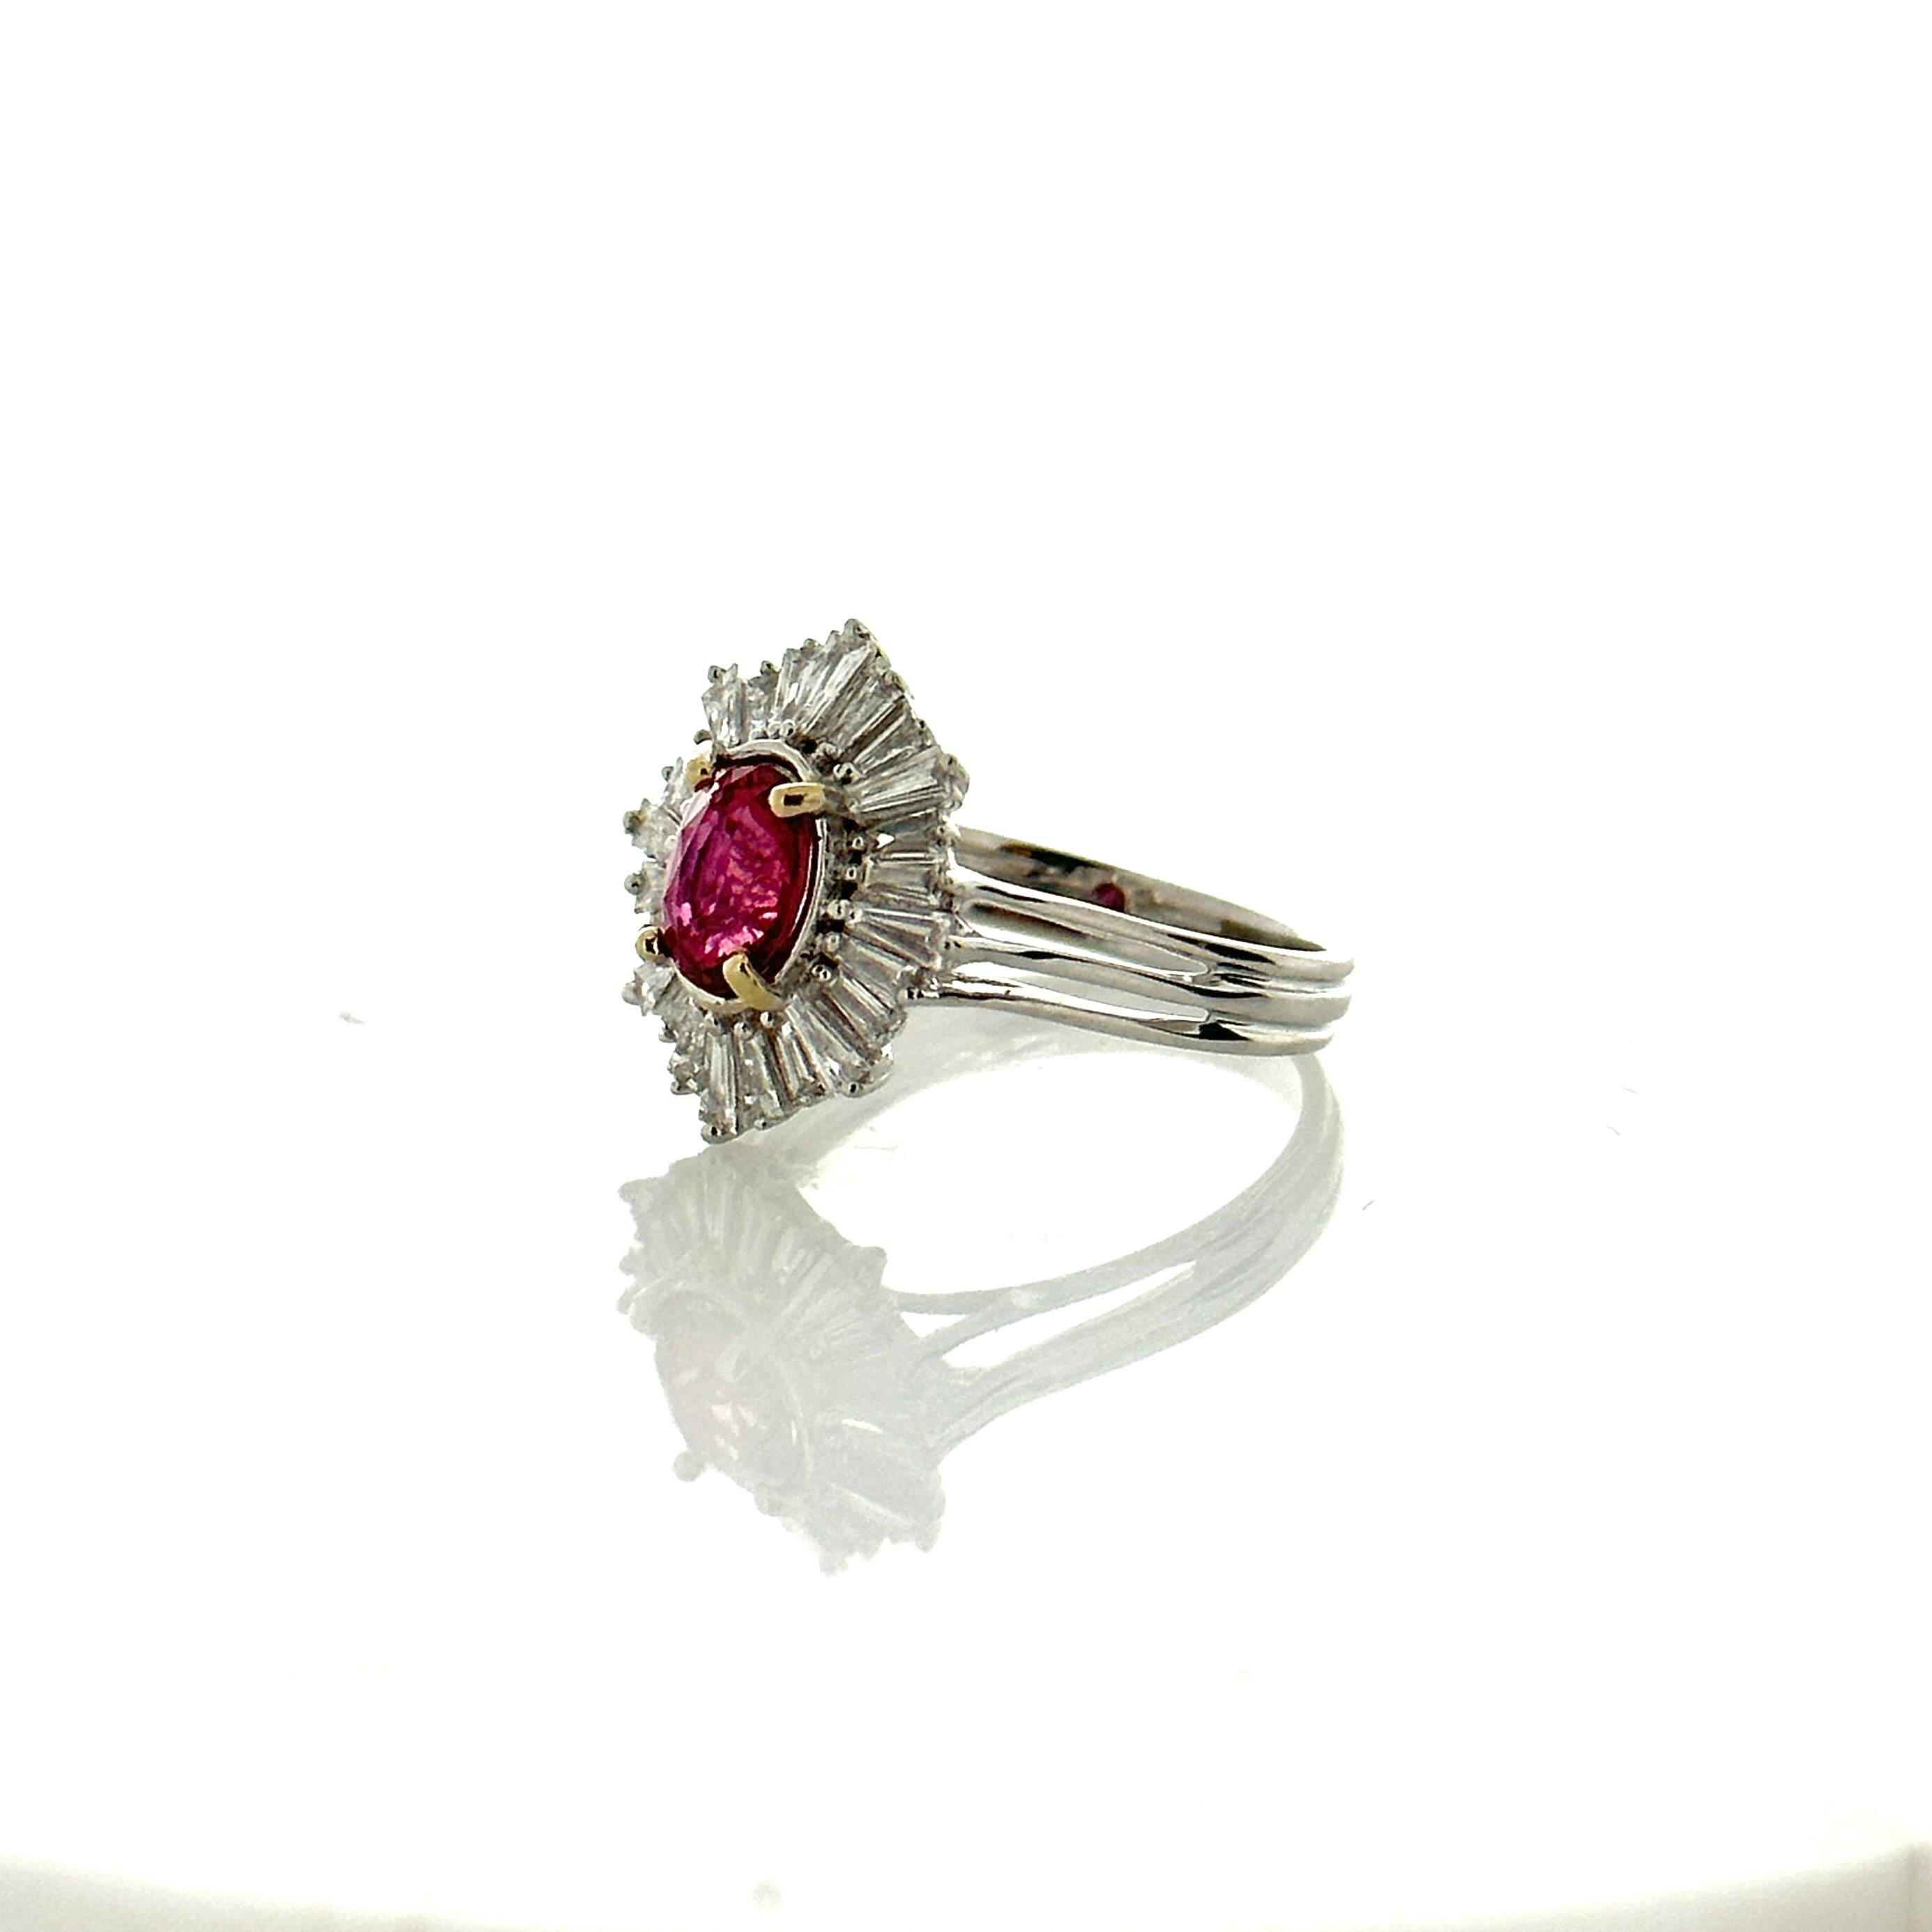 This is a cocktail ring featuring a 1.26 carat, oval brilliant, red ruby. The gem source is Myanmar. Its color is blood red with no modifier colors. Its transparency and luster are superb. The vibrant red is complemented by a dazzling display of